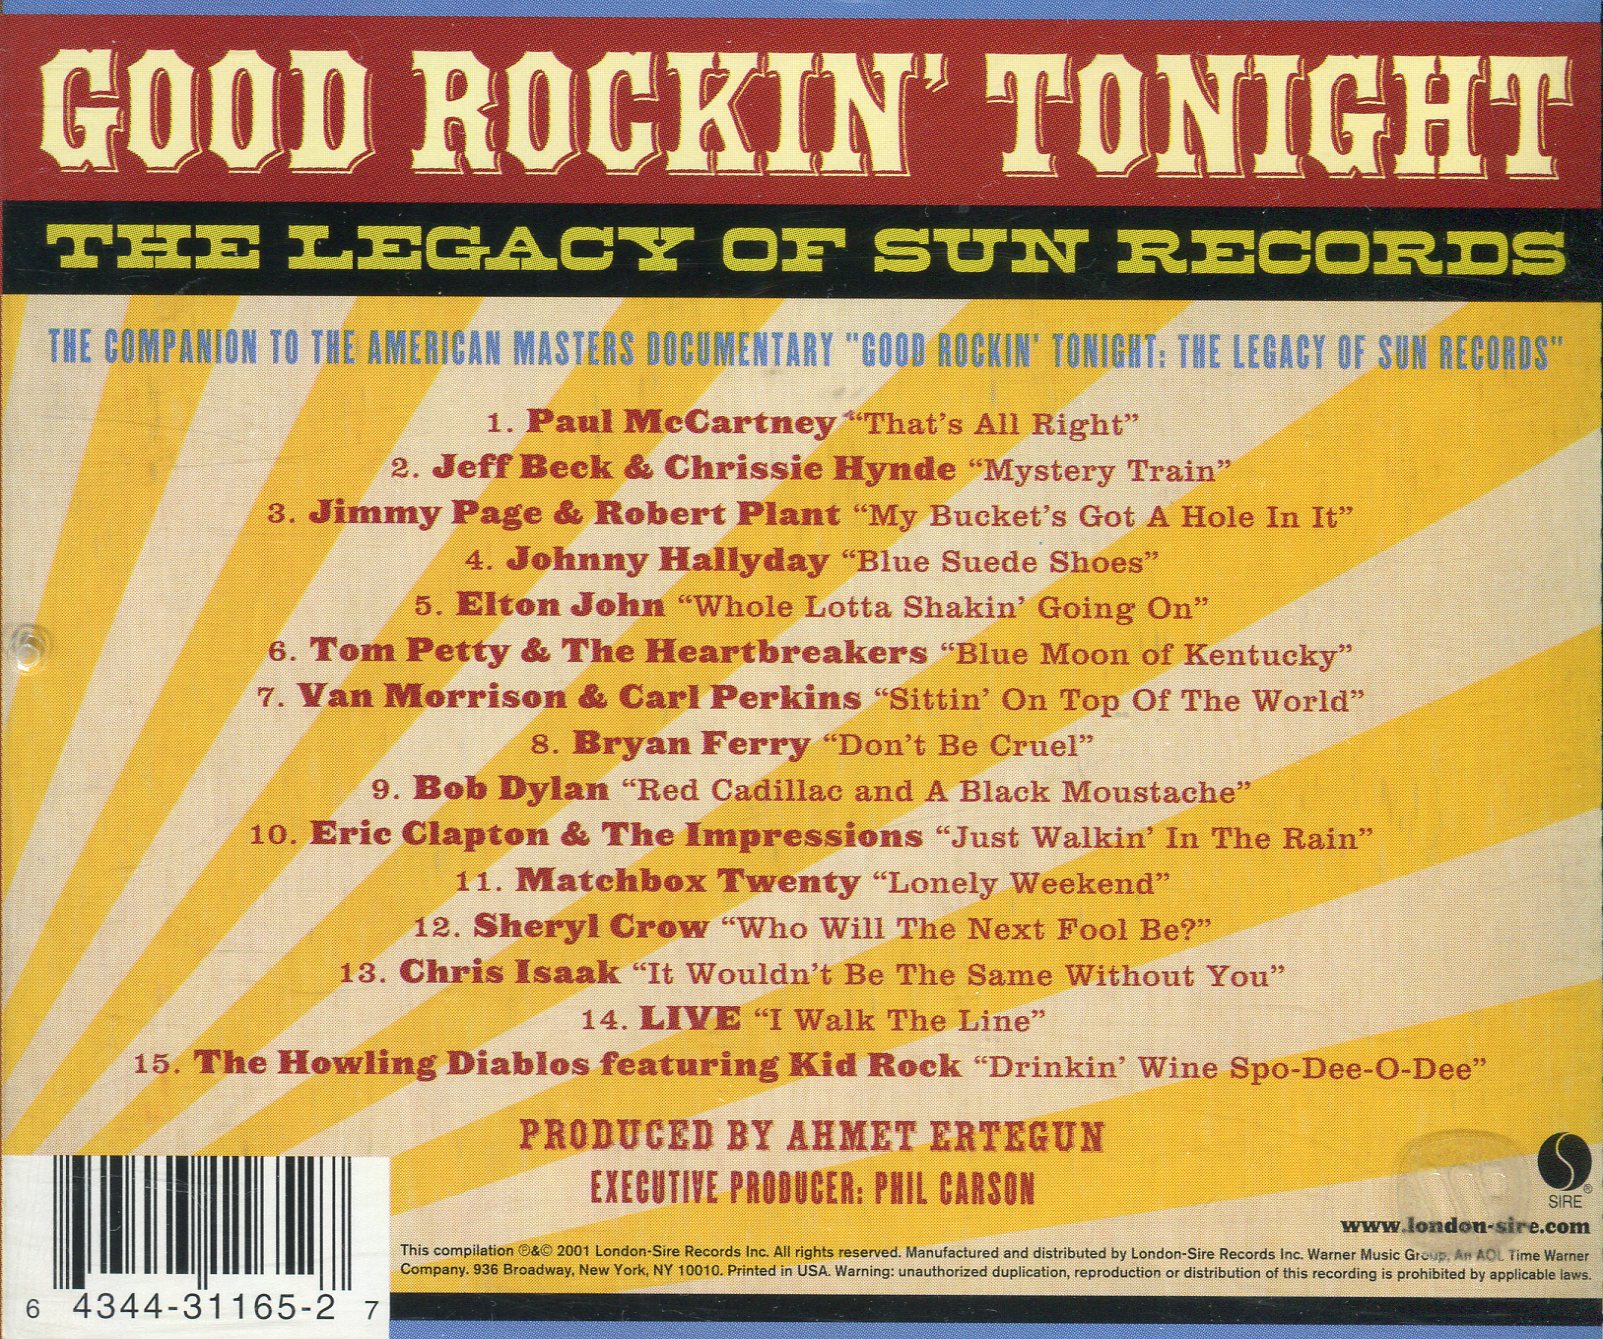 Good Rockin' Tonight - The Legacy of Sun Records (compilation CD)